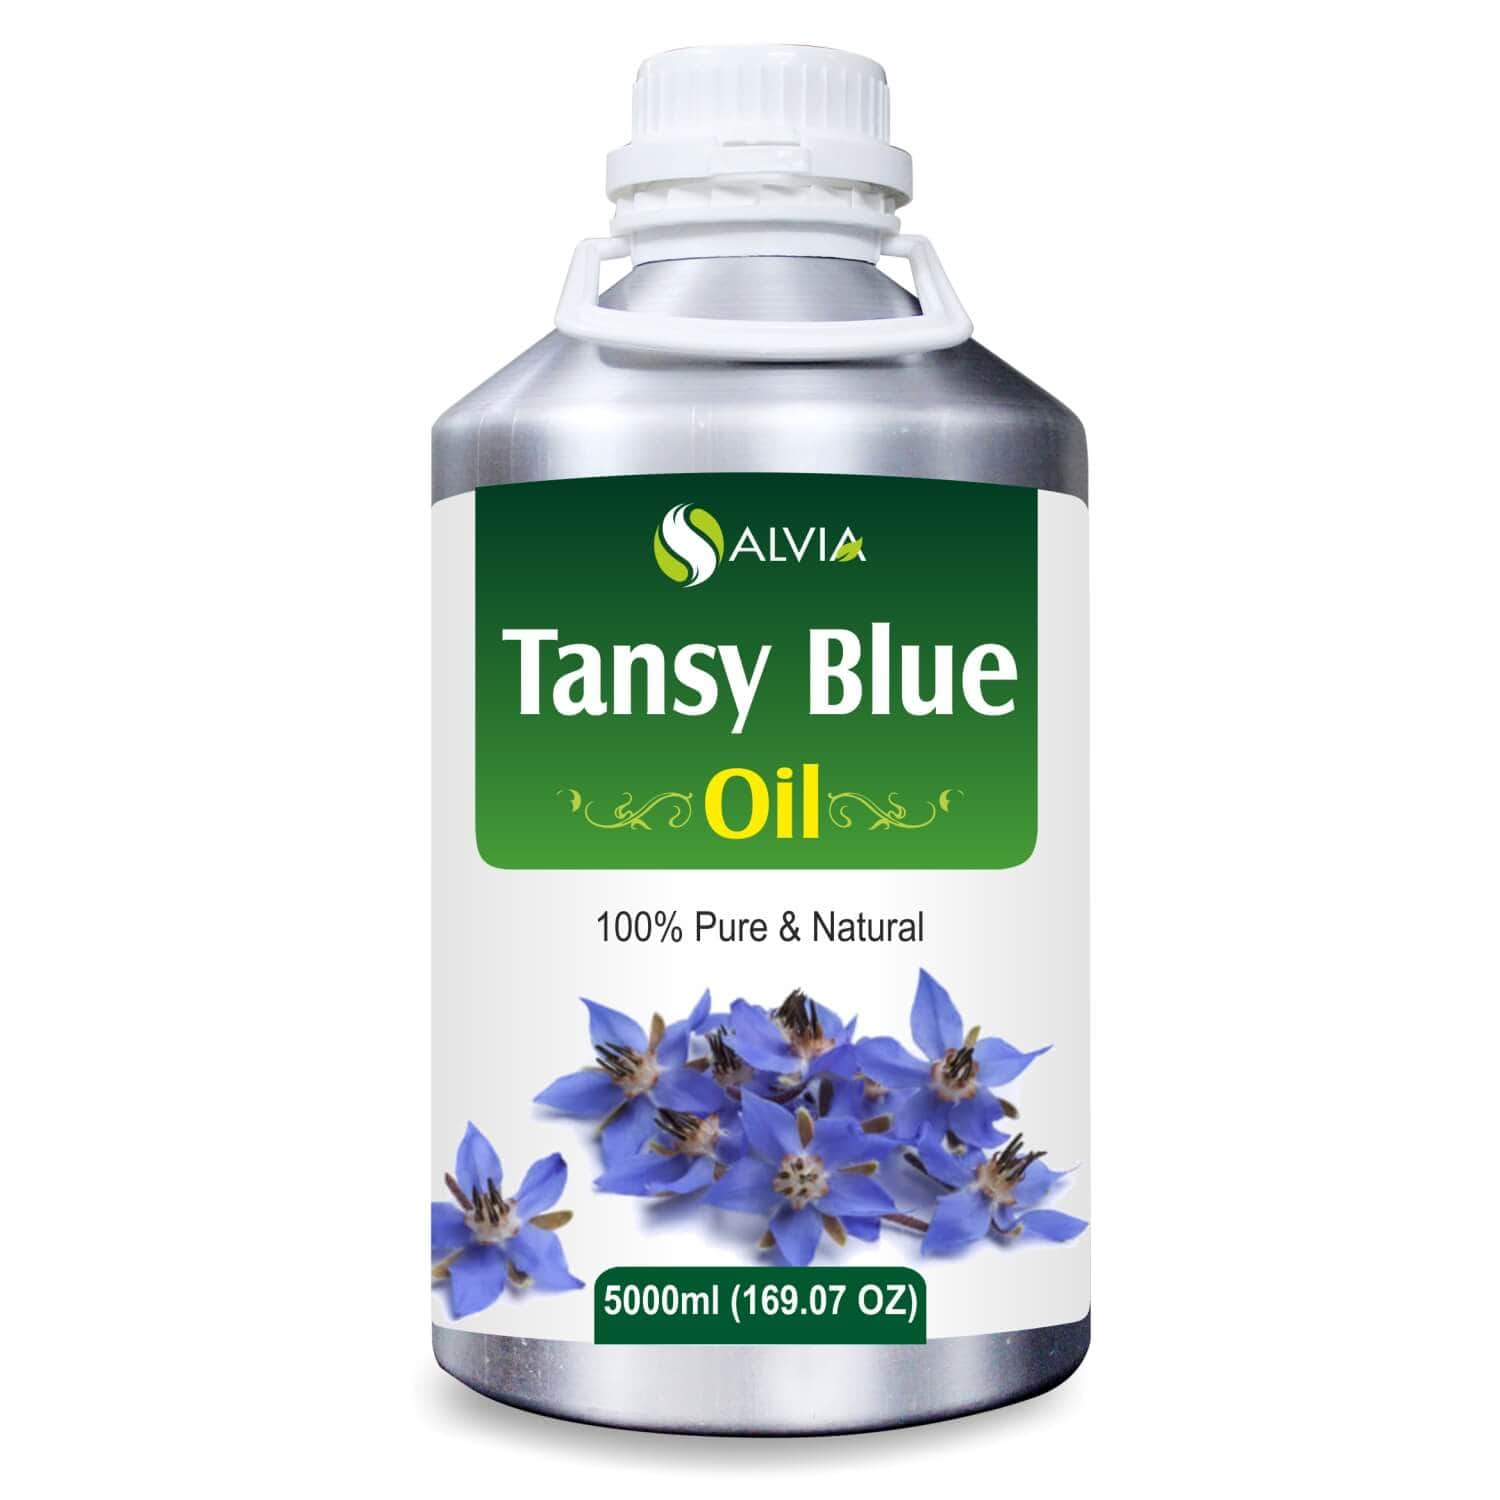 Salvia Natural Essential Oils 5000ml Tansy Oil (Tanacetum Vulgare) Pure Undiluted Natural Essential Oil Natural Aromatherapy Reduces Acne, Relief Pain